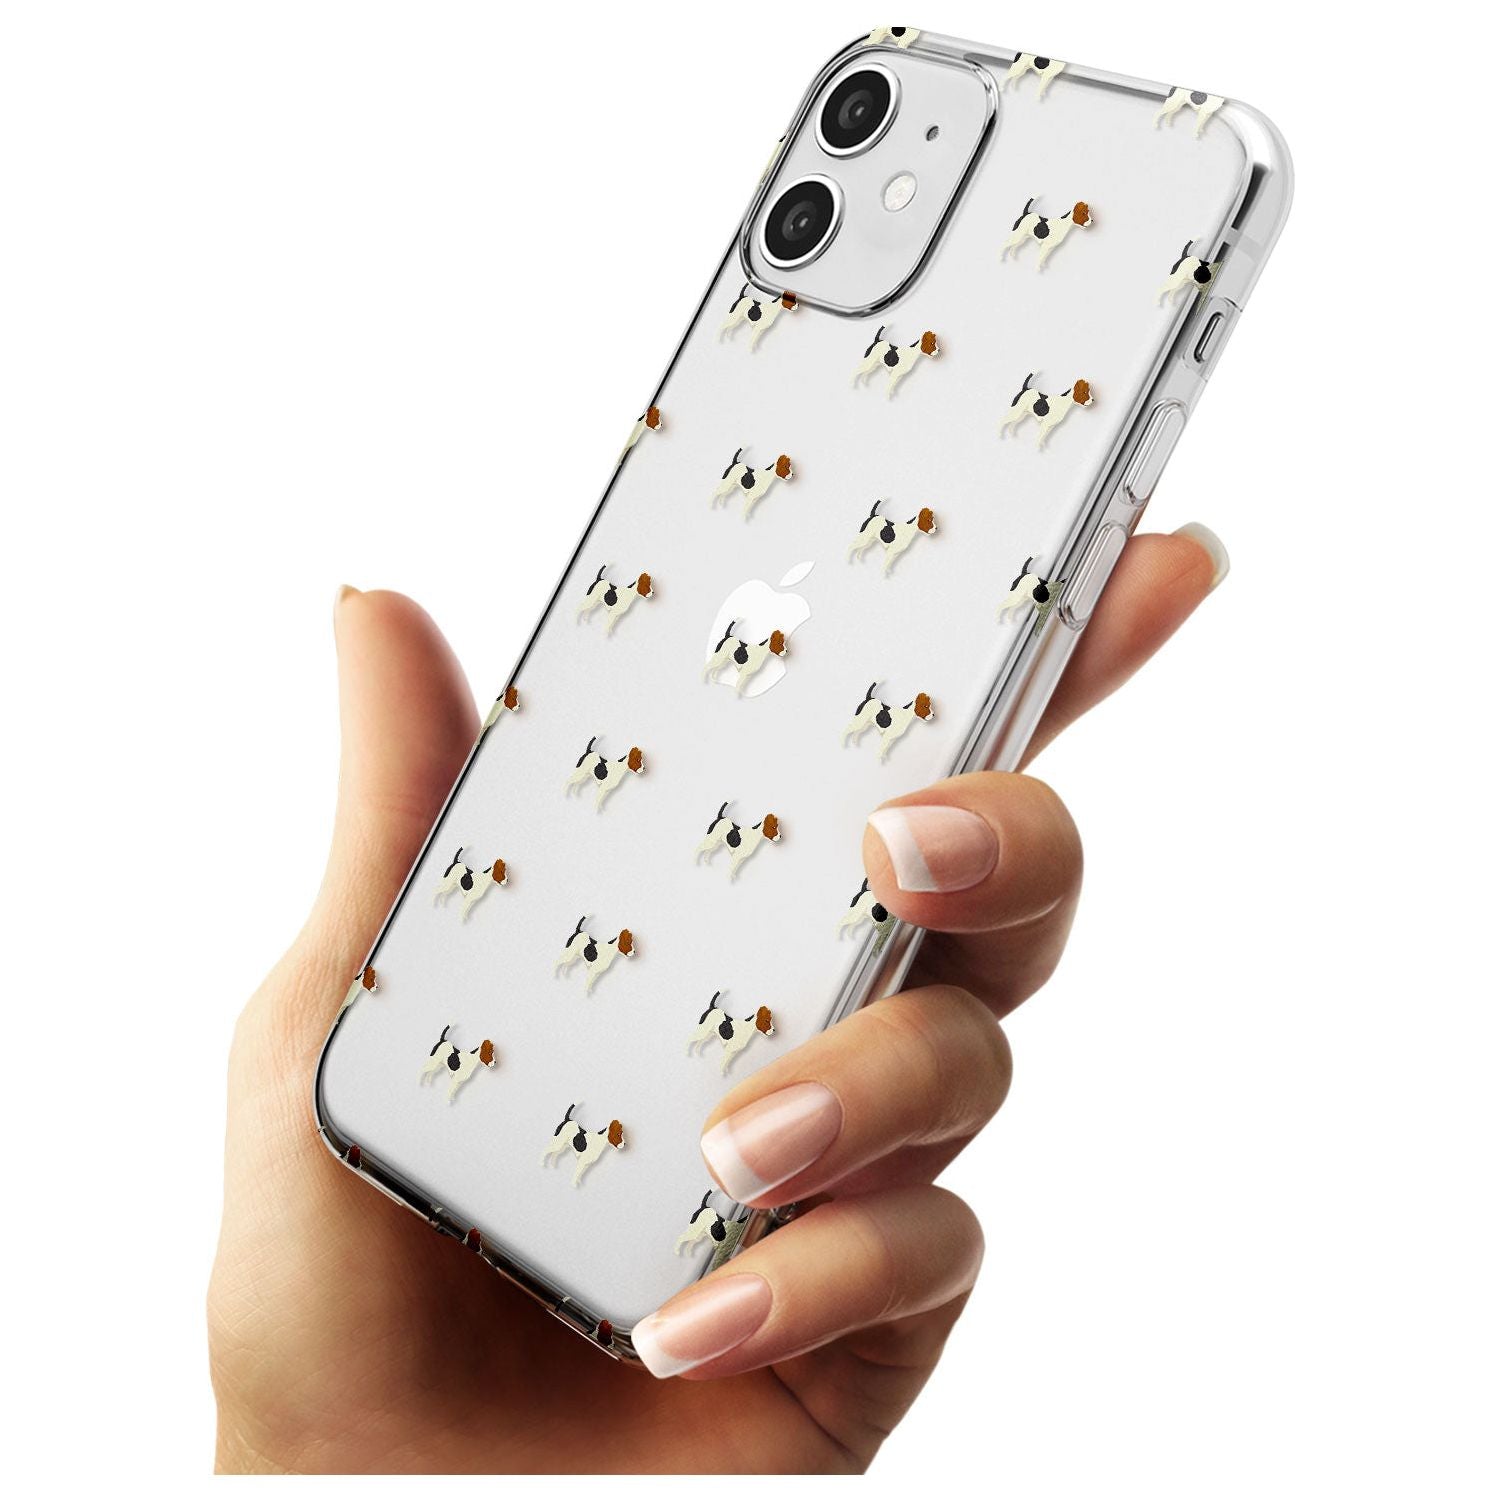 Jack Russell Terrier Dog Pattern Clear Slim TPU Phone Case for iPhone 11